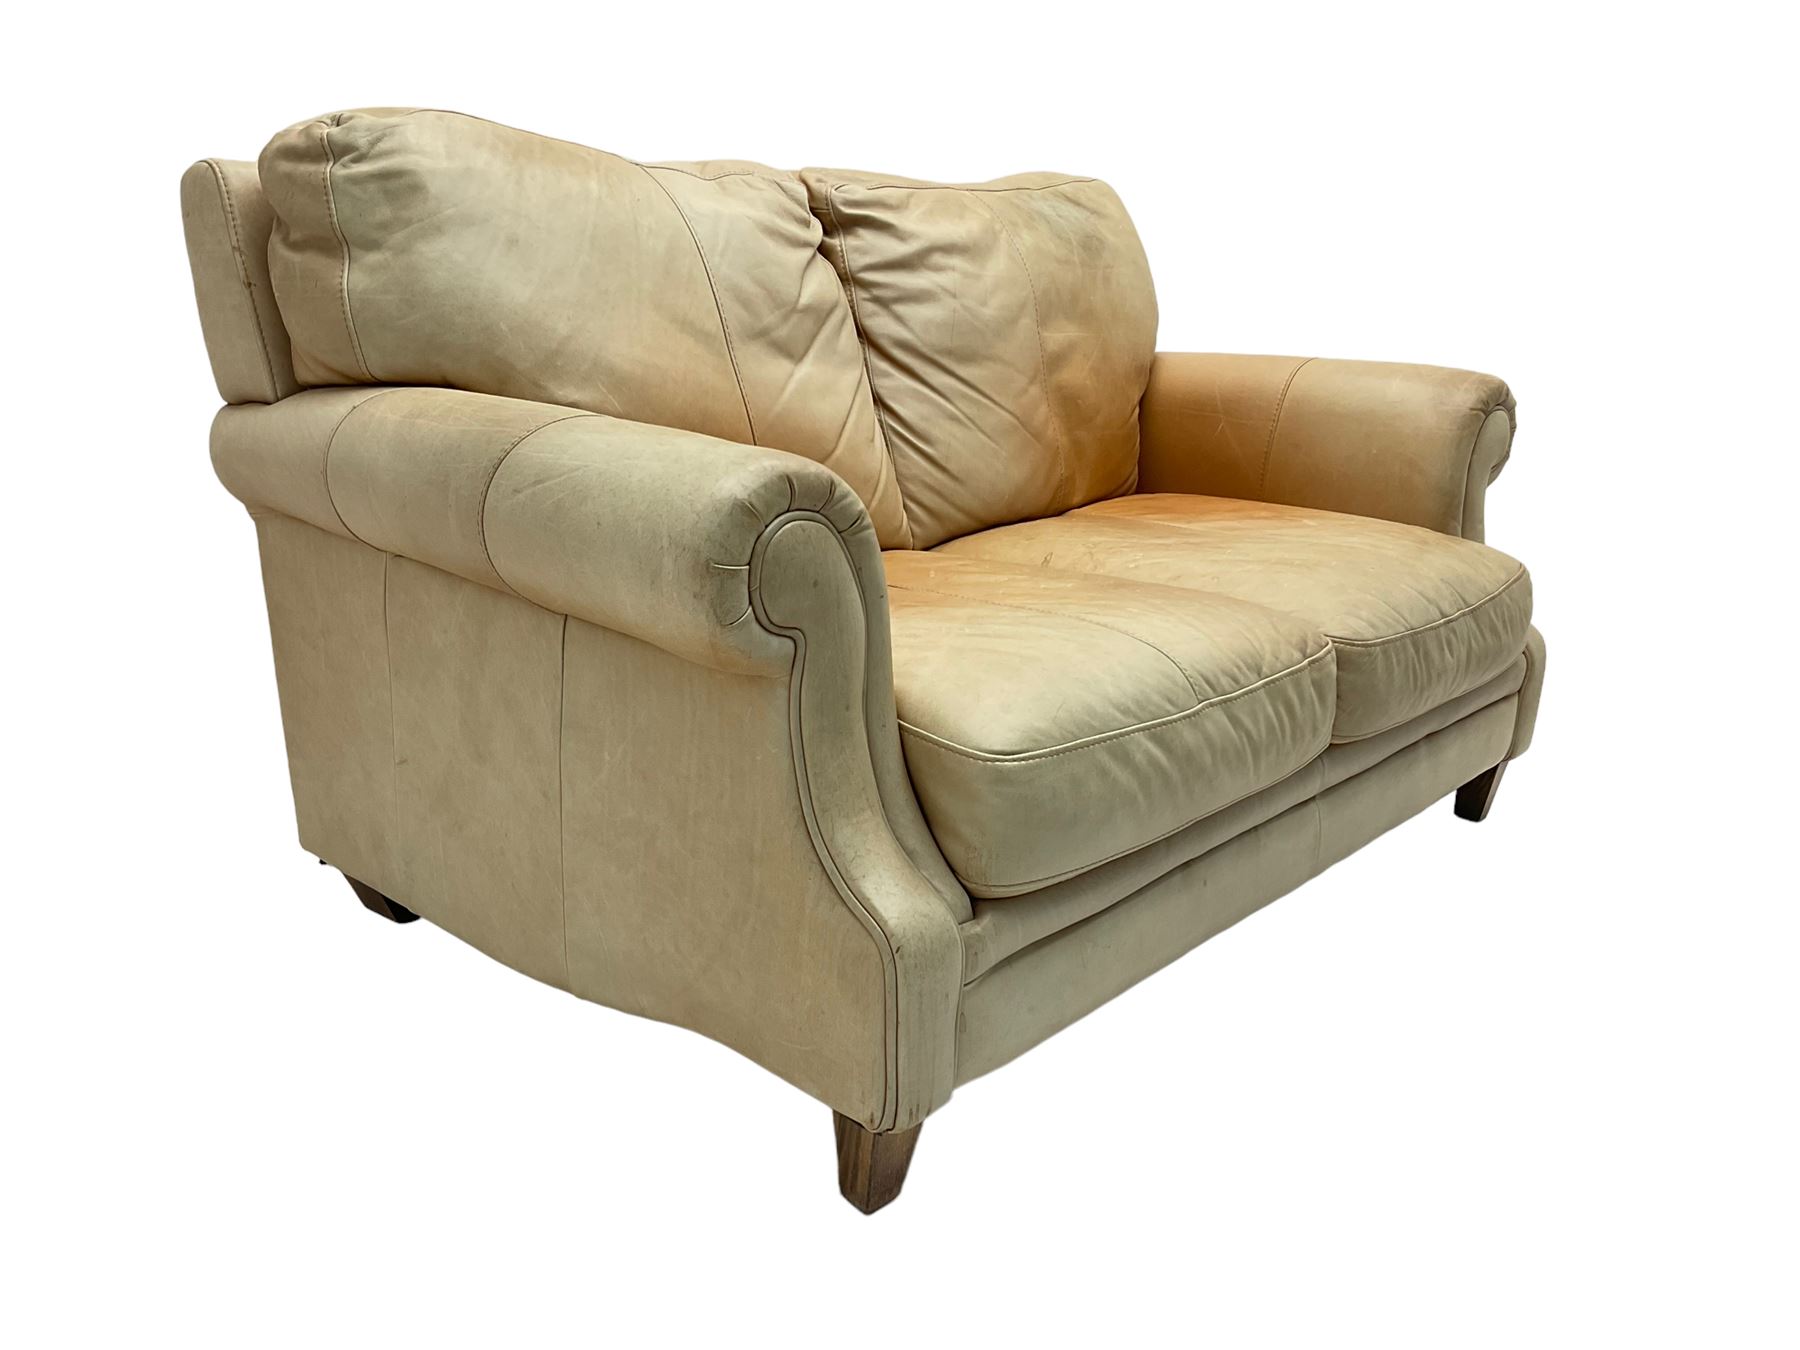 Two seat sofa, upholstered in pale tan leather with scrolled arms ...